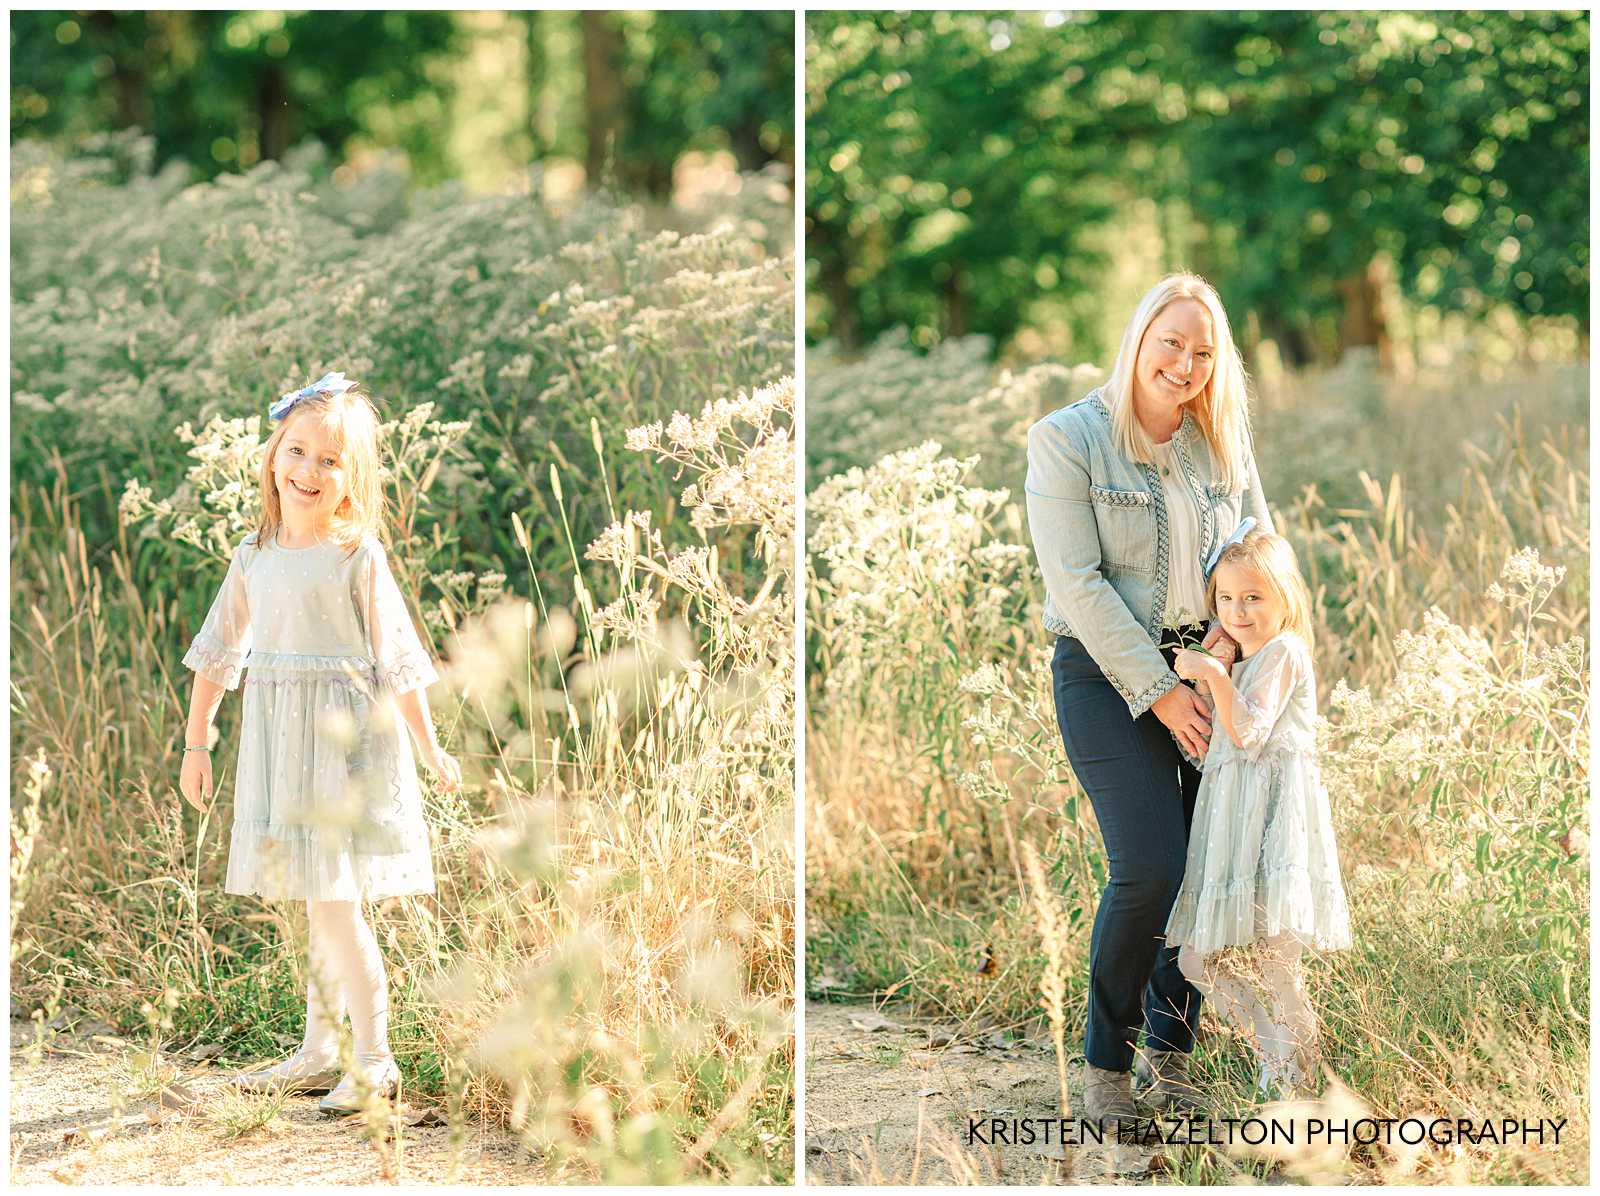 Mom and young daughter standing in a field of yellow grass for their River Forest IL family portraits by Kristen Hazelton